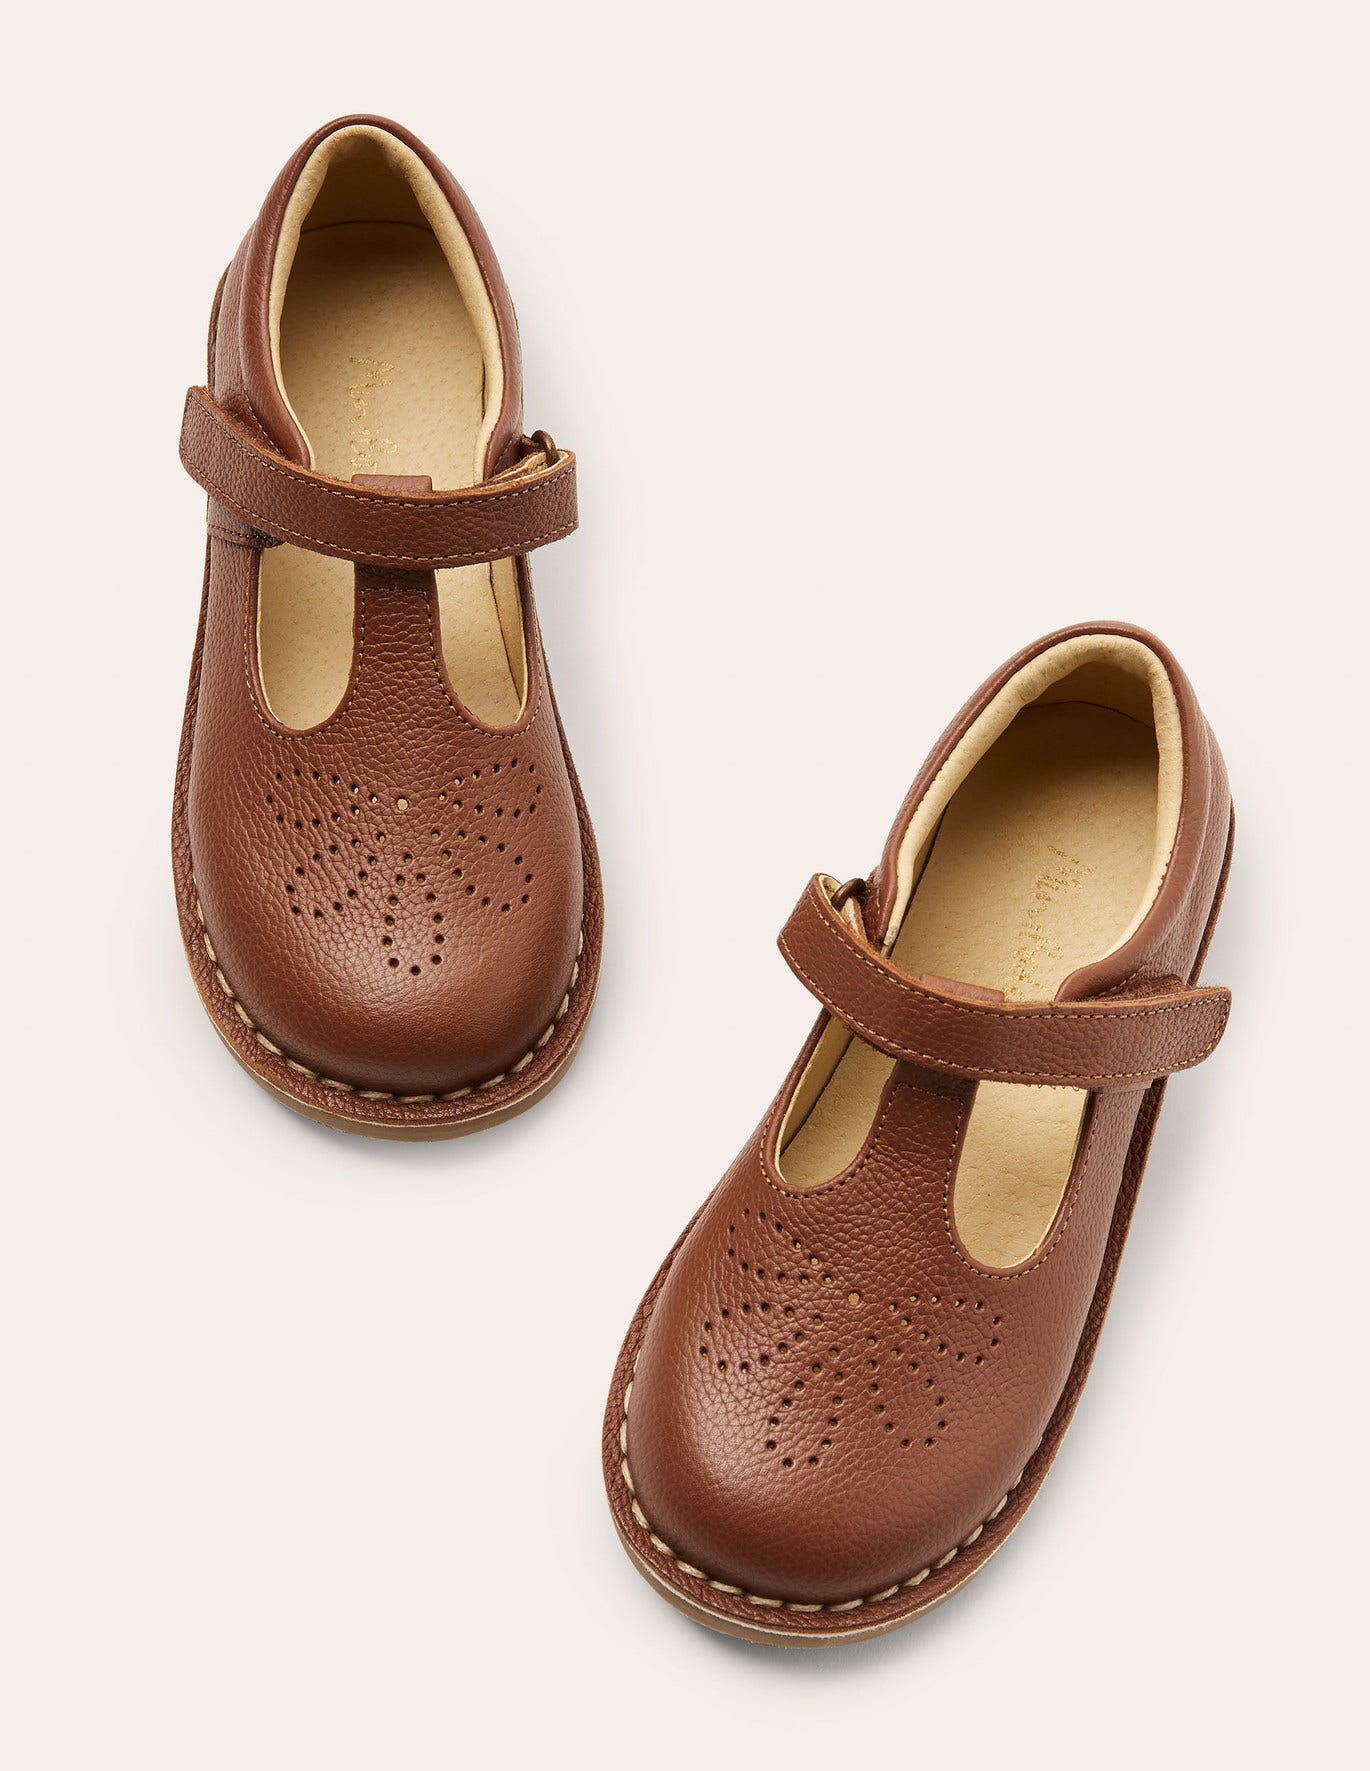 Boden Leather T-bar Flats - Tan